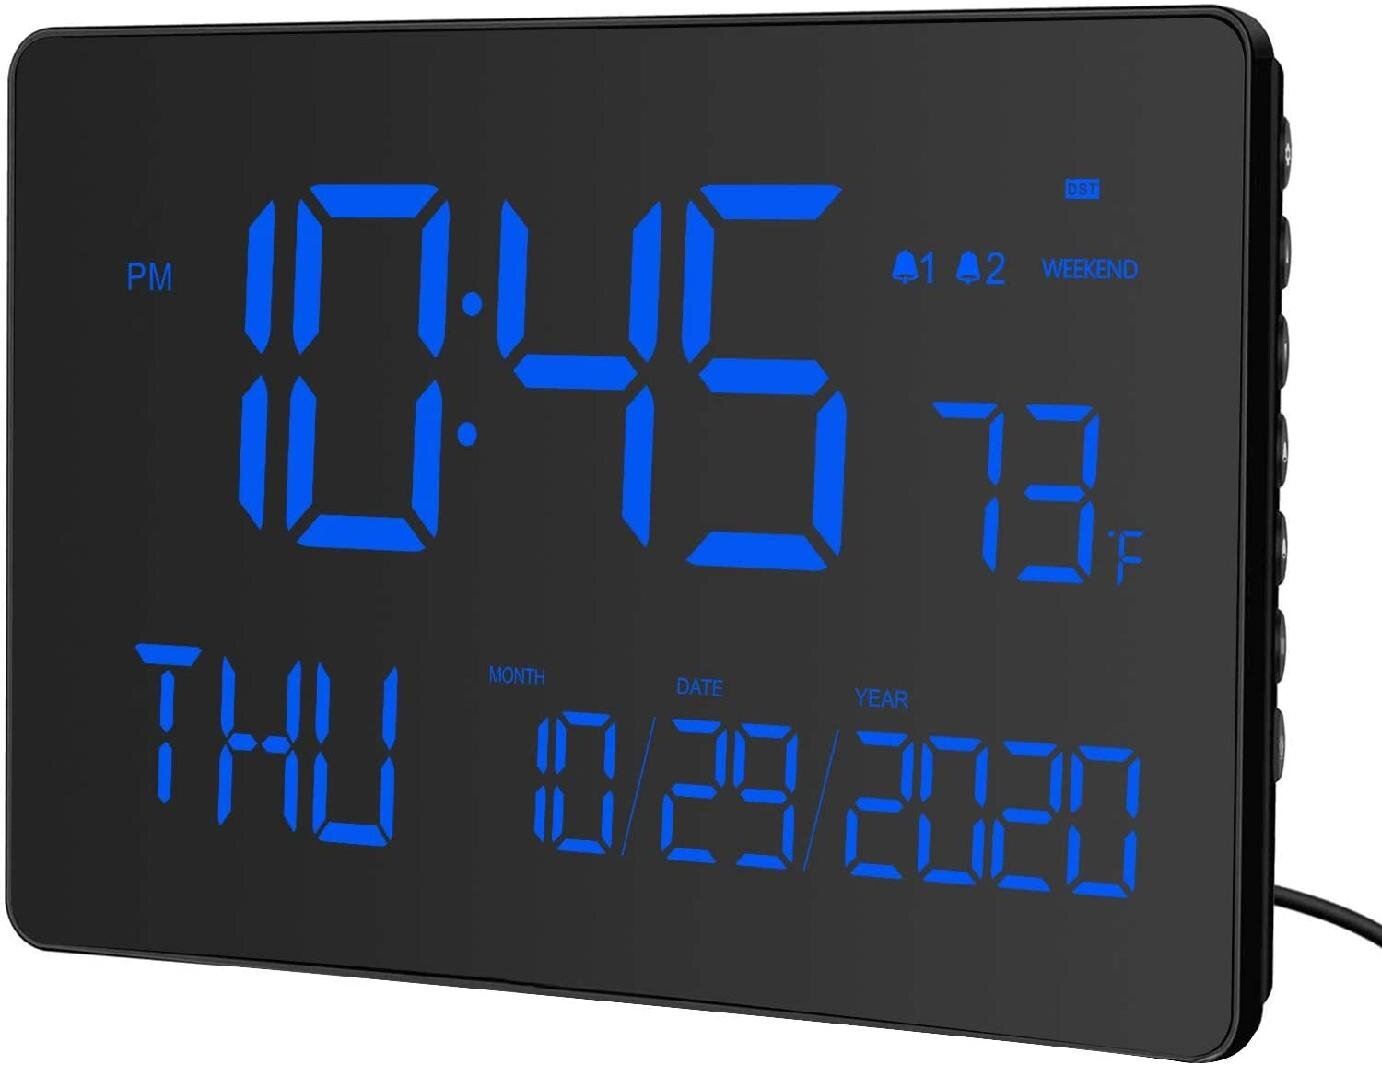 Details about   LED Digital Wall Alarm Clock Calendar Large Display w/ Indoor Temperature Date 